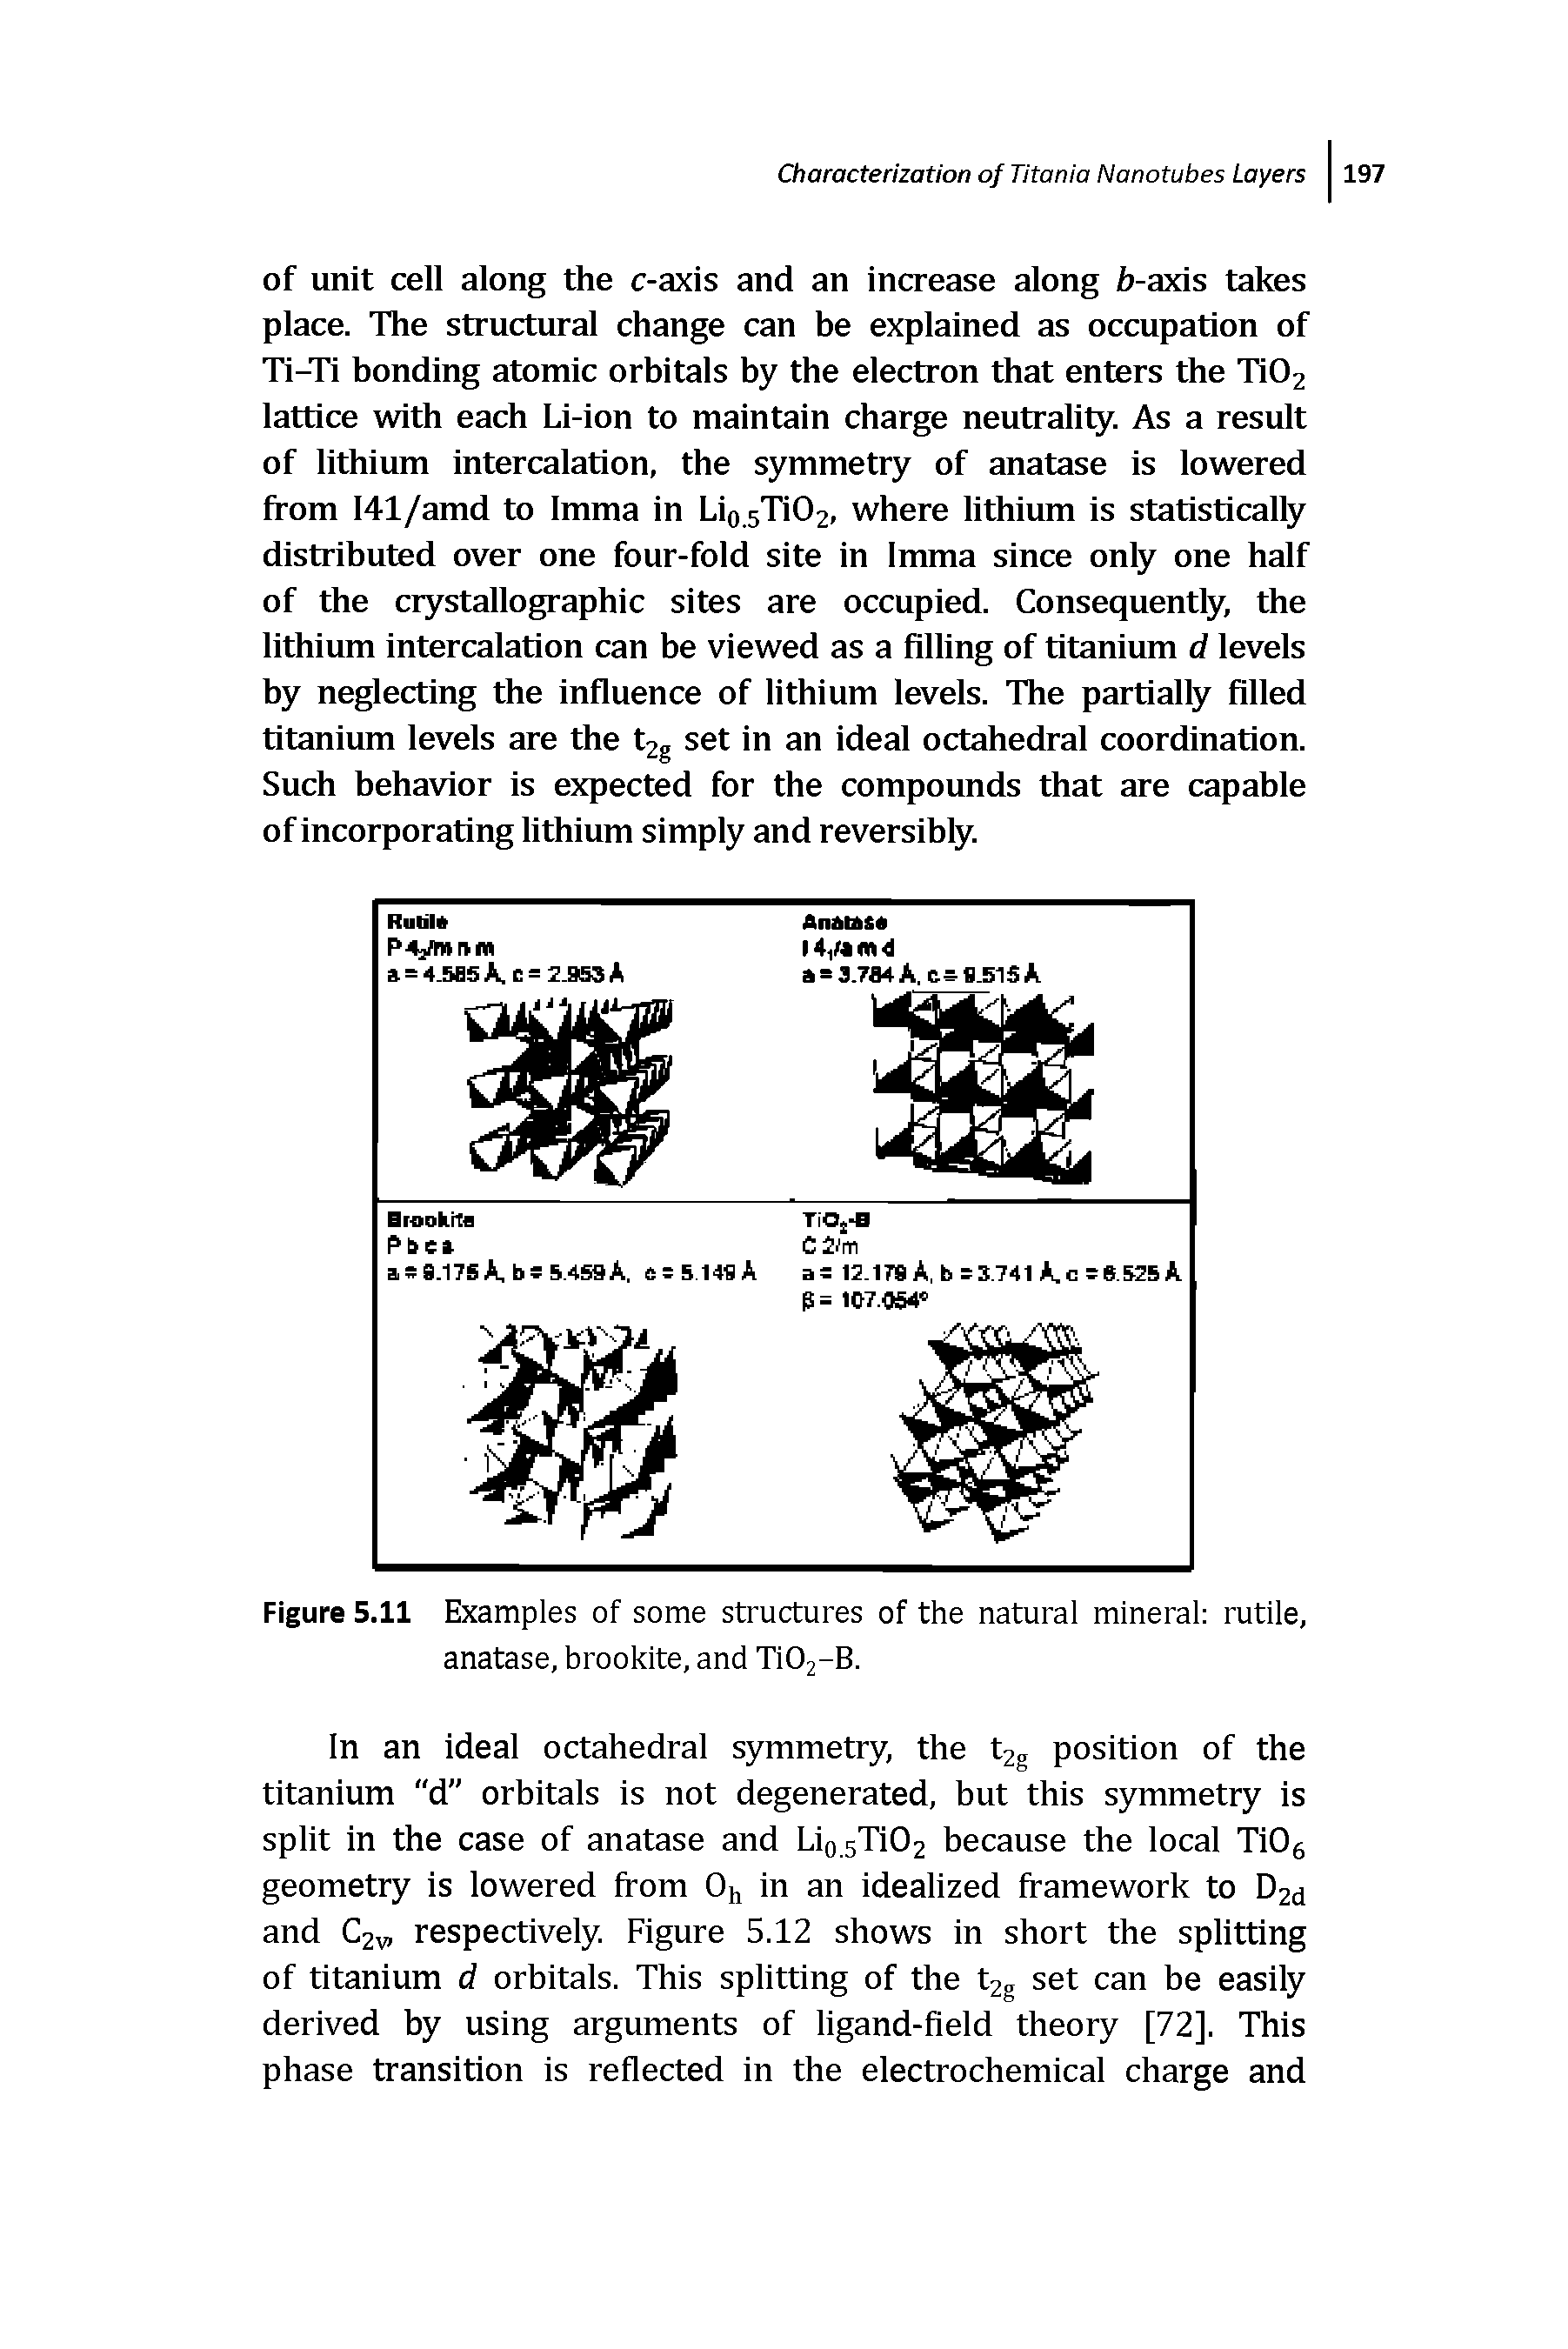 Figure 5.11 Examples of some structures of the natural mineral rutile, anatase, brooklte, and TlOj-B.